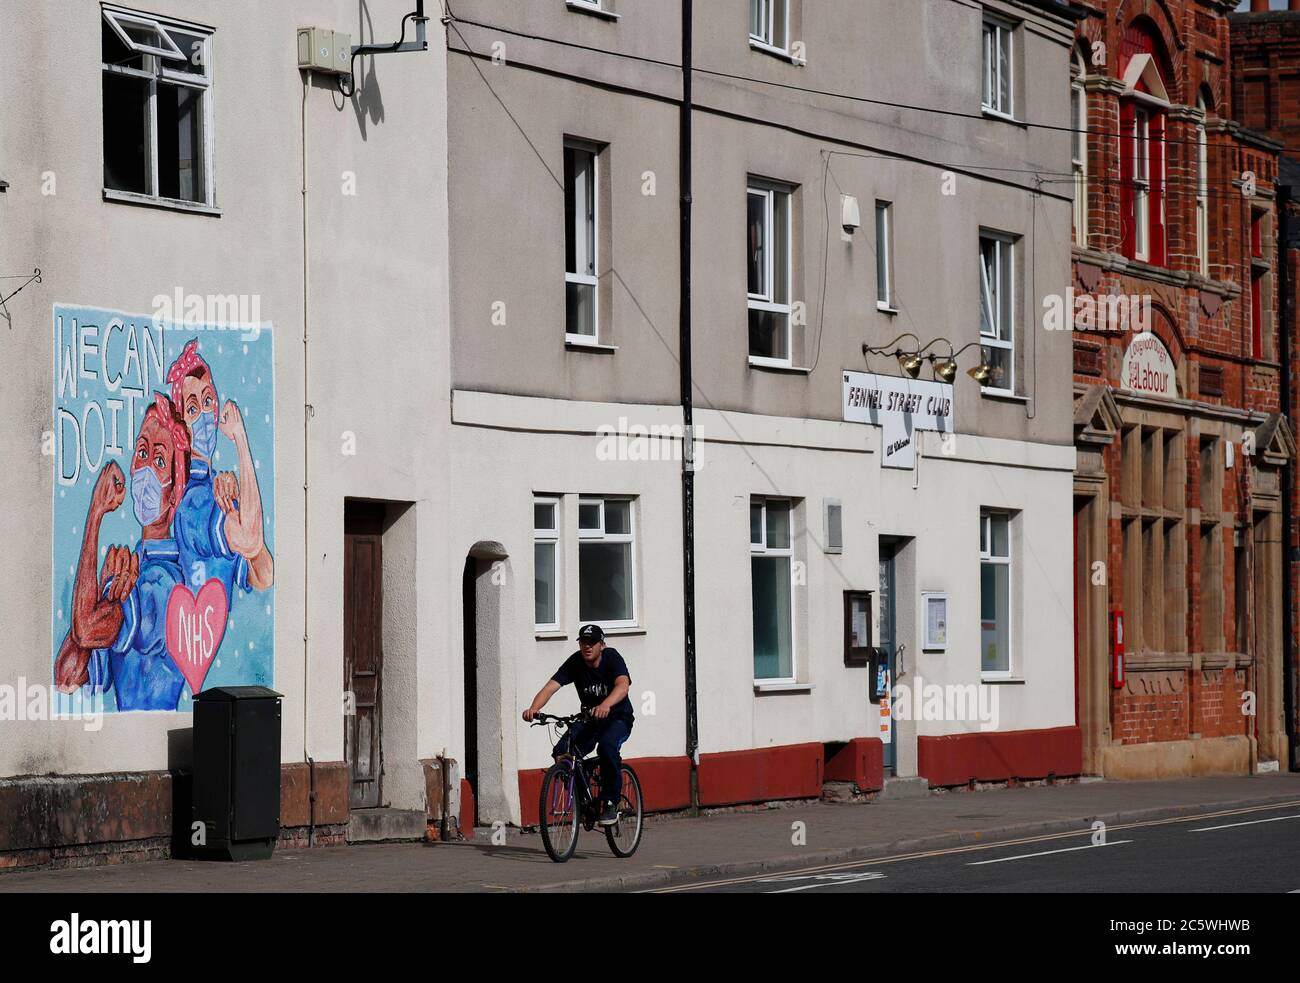 Loughborough, Leicestershire, UK. 5th July 2020. A man cycles past a mural paying tribute to the National Health Service on its 72nd anniversary during the coronavirus pandemic. Credit Darren Staples/Alamy Live News. Stock Photo